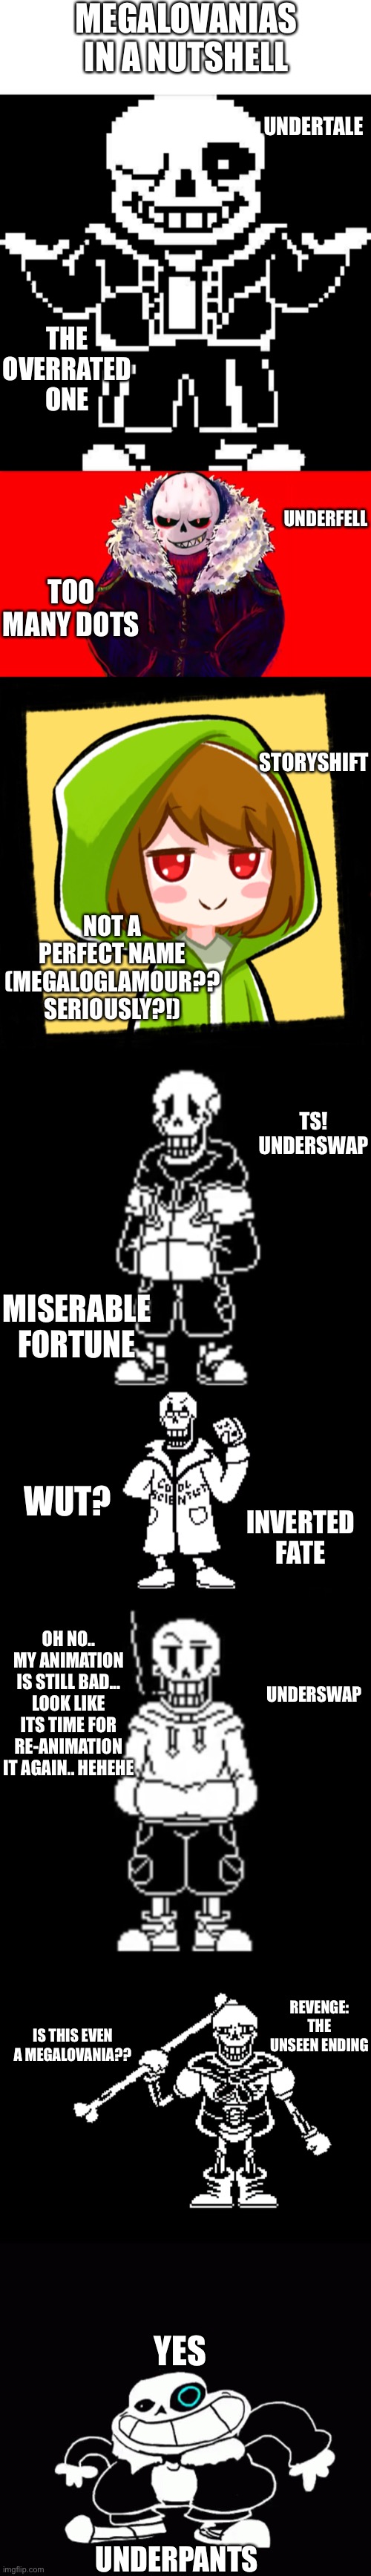 Megalovania AU in a nutshell | MEGALOVANIAS IN A NUTSHELL; UNDERTALE; THE OVERRATED ONE; UNDERFELL; TOO MANY DOTS; STORYSHIFT; NOT A PERFECT NAME (MEGALOGLAMOUR?? SERIOUSLY?!); TS! UNDERSWAP; MISERABLE FORTUNE; WUT? INVERTED FATE; UNDERSWAP; OH NO.. MY ANIMATION IS STILL BAD... LOOK LIKE ITS TIME FOR RE-ANIMATION IT AGAIN.. HEHEHE; REVENGE: THE UNSEEN ENDING; IS THIS EVEN A MEGALOVANIA?? YES; UNDERPANTS | image tagged in memes,funny,sans,undertale,in a nutshell,references | made w/ Imgflip meme maker